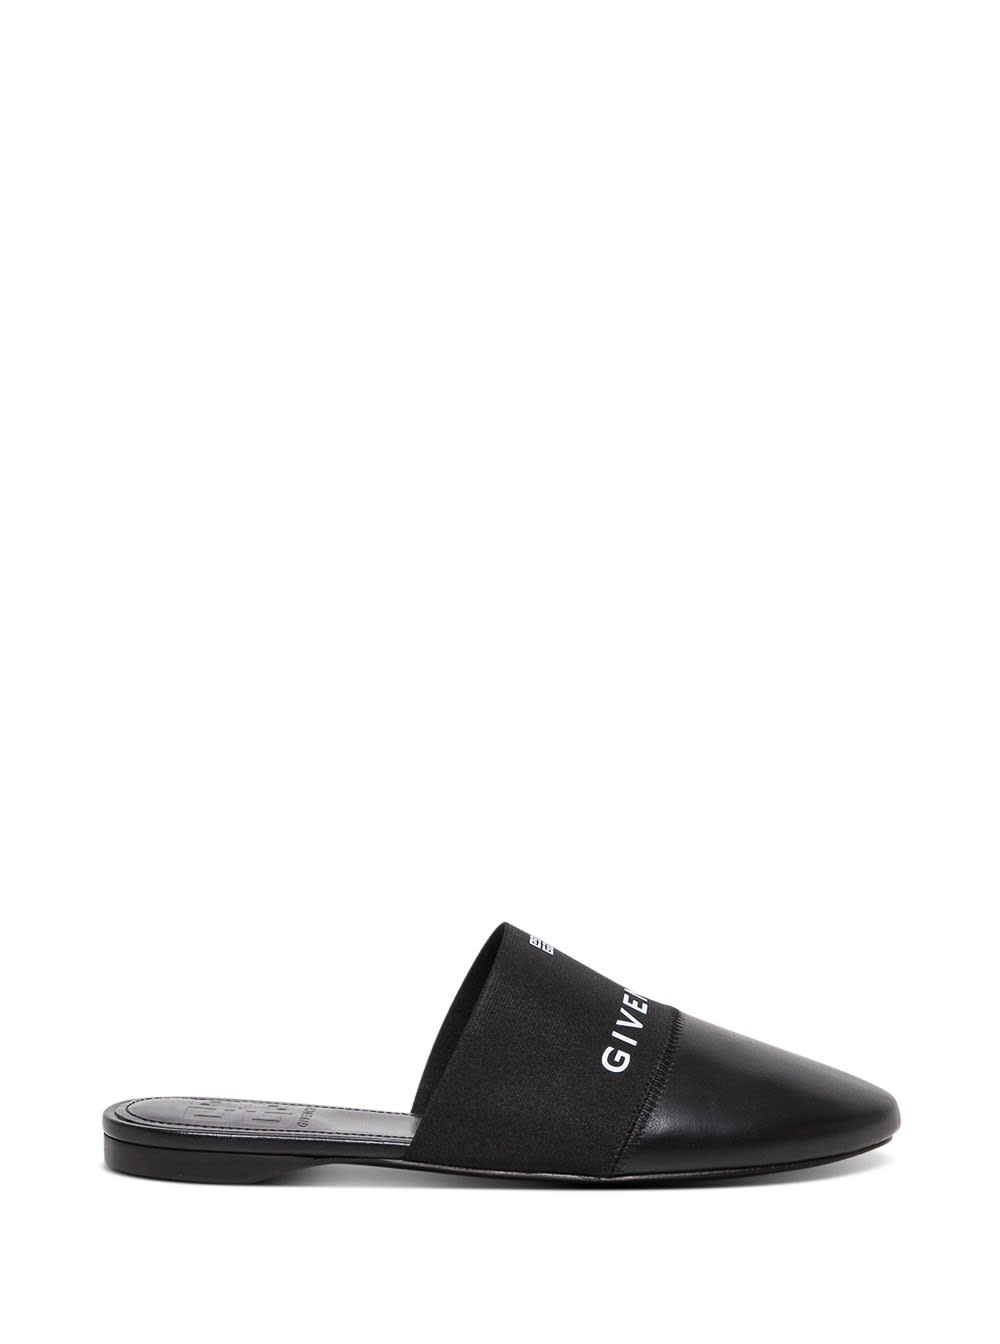 Givenchy 4g Flat Mules In Black Leather